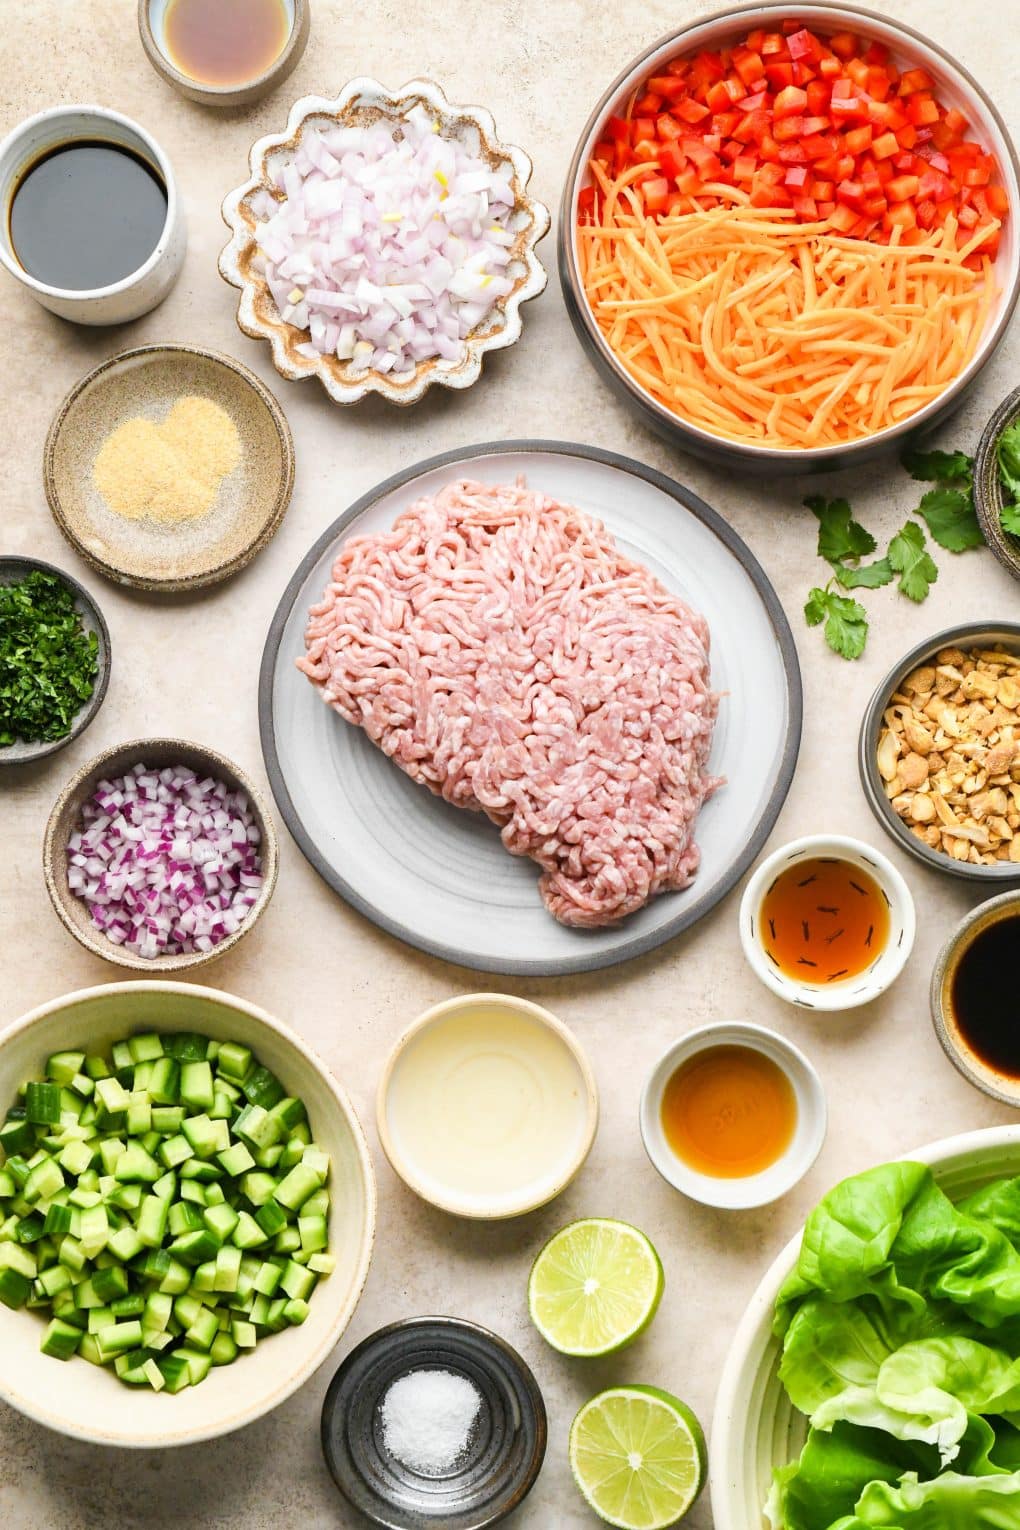 A vibrant display of ingredients for pork lettuce wraps in various ceramic dishes on a cream colored background.